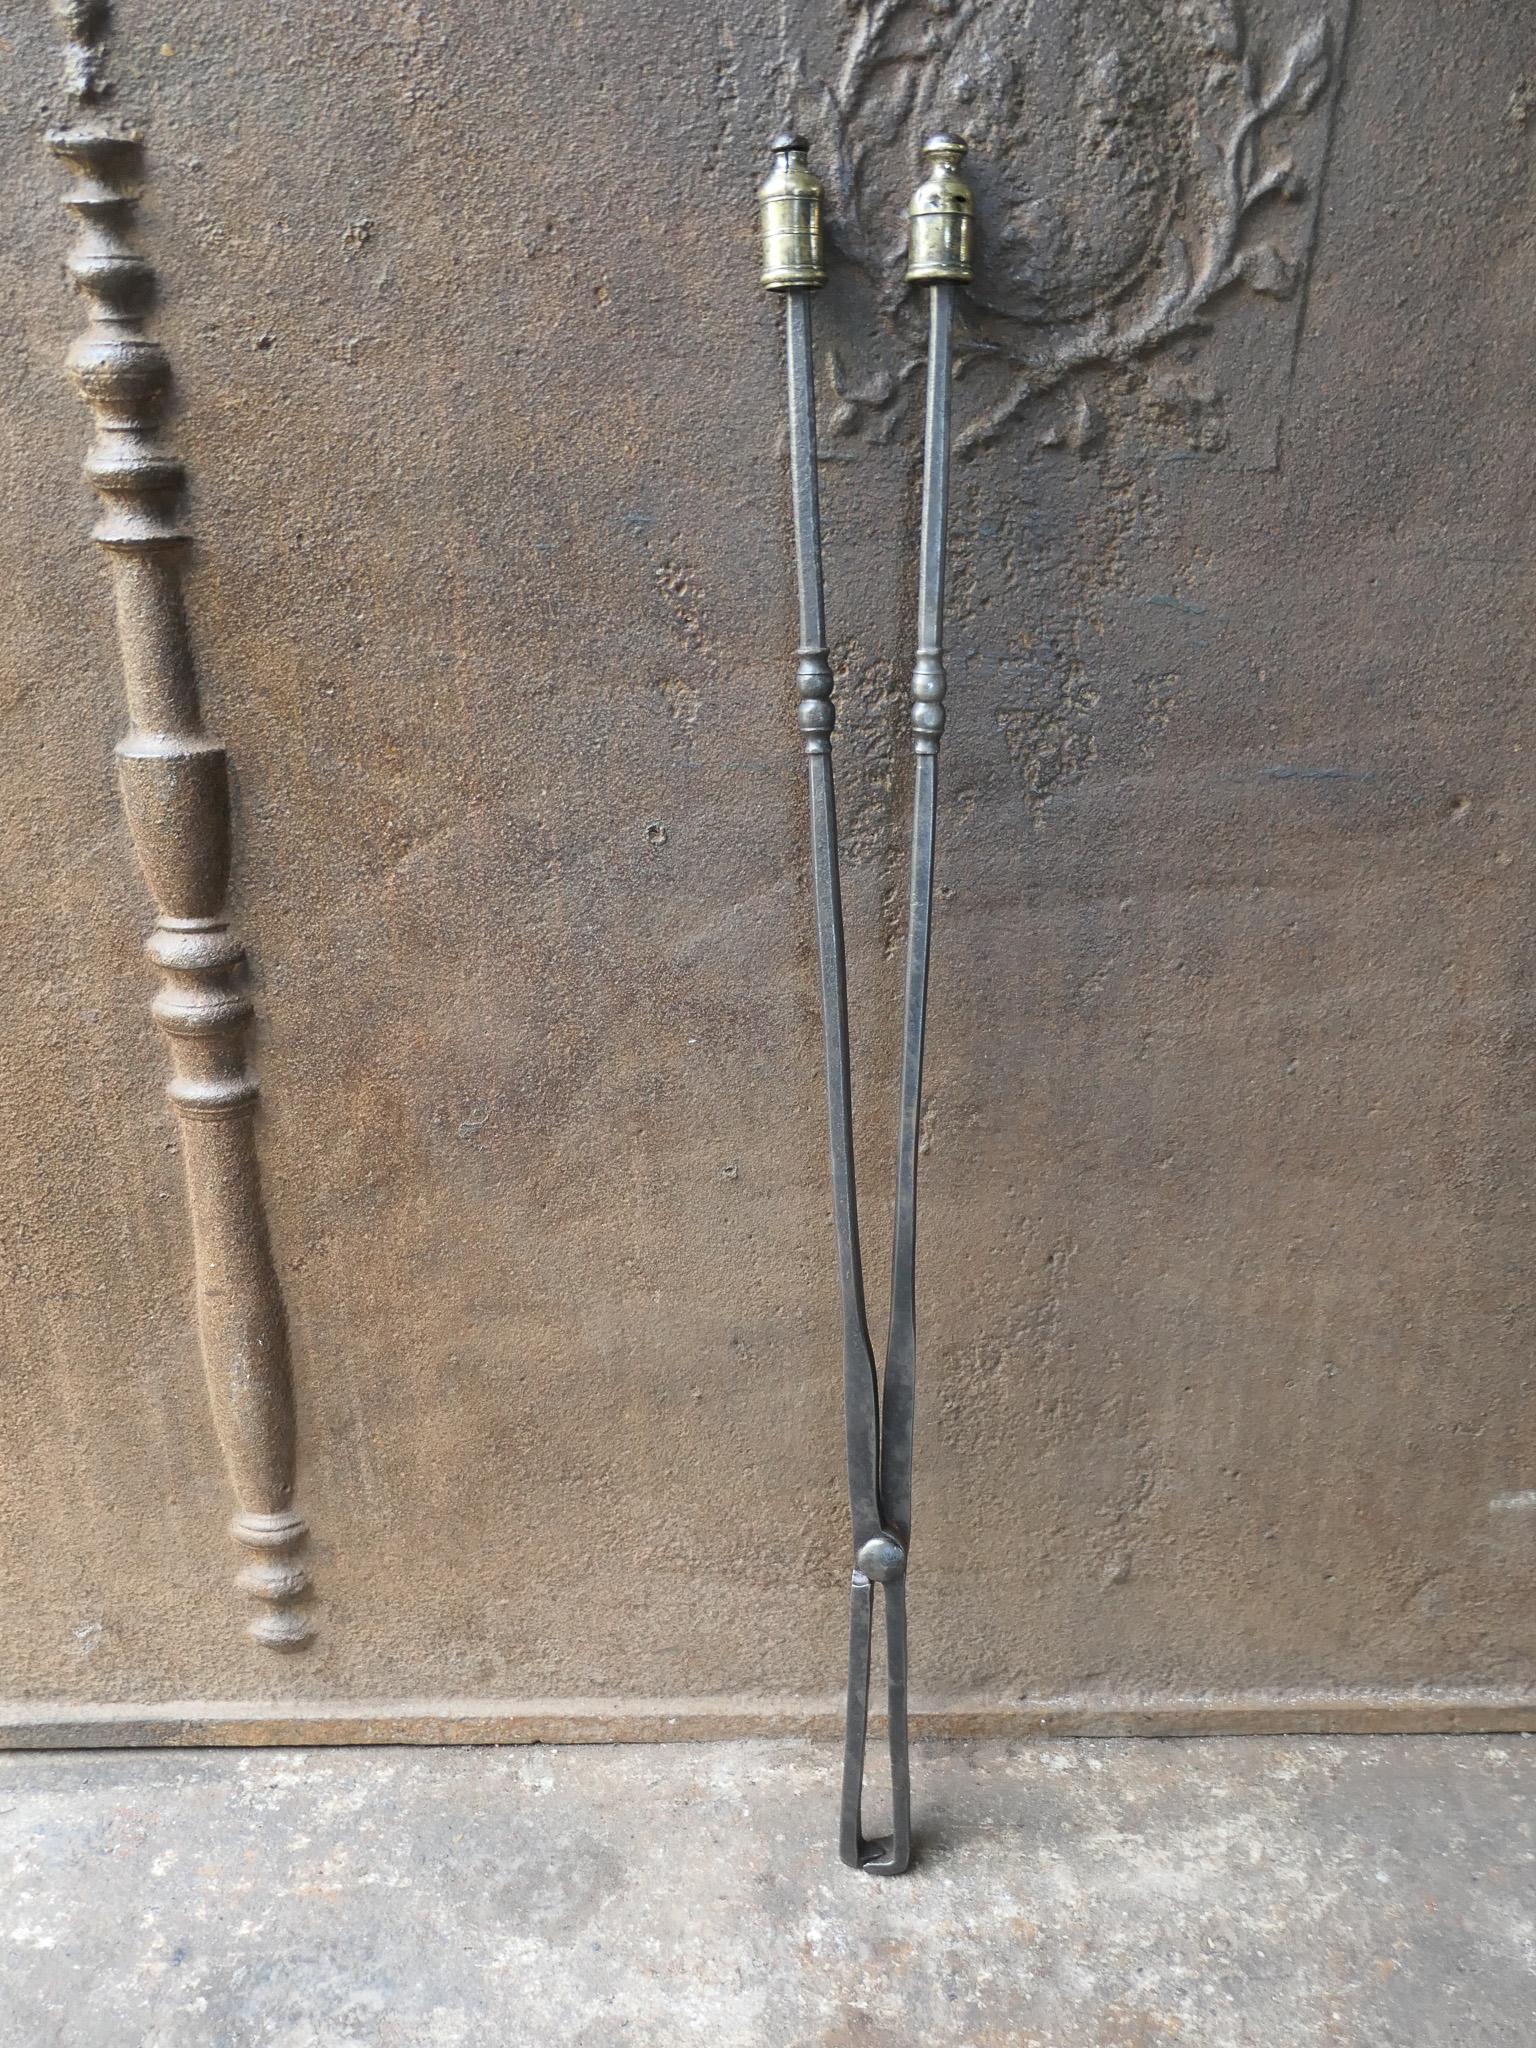 Large 19th century French Napoleon III fireplace tongs made of wrought iron. The handle is decorated with brass. The fire tongs are in a good condition and are fully functional.